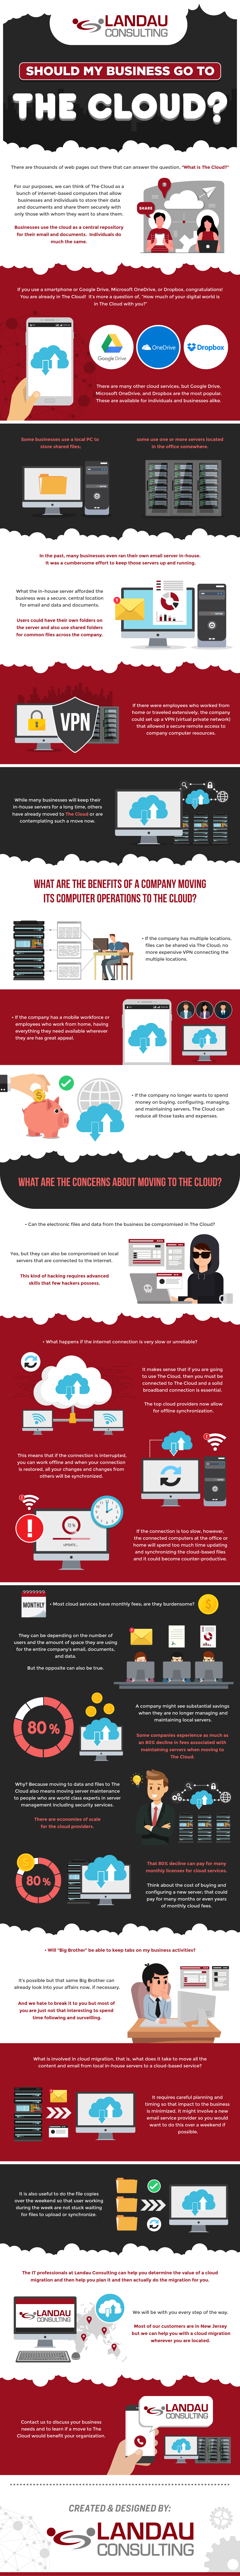 Should My Business Go to The Cloud? #infographic